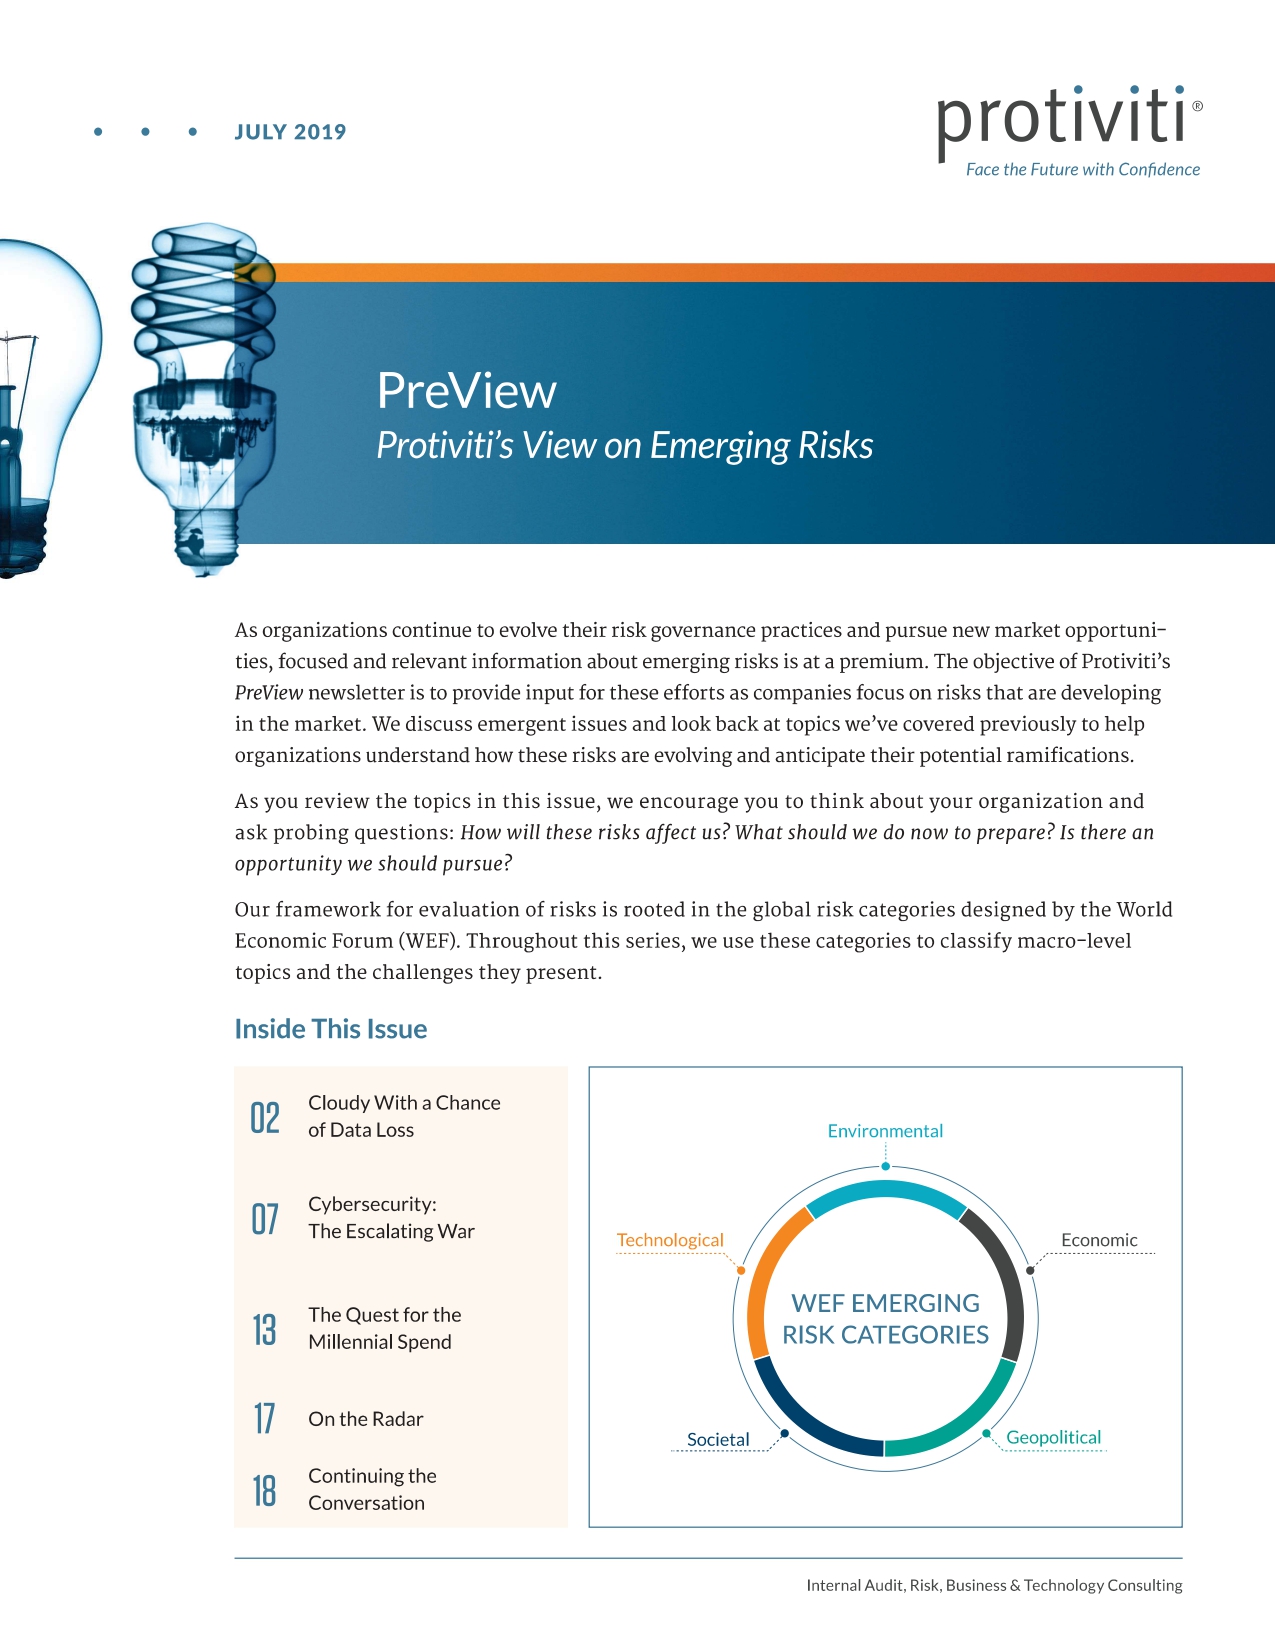 Screenshot of the first page of PreView Protiviti's View on Emerging Risks, July 2019